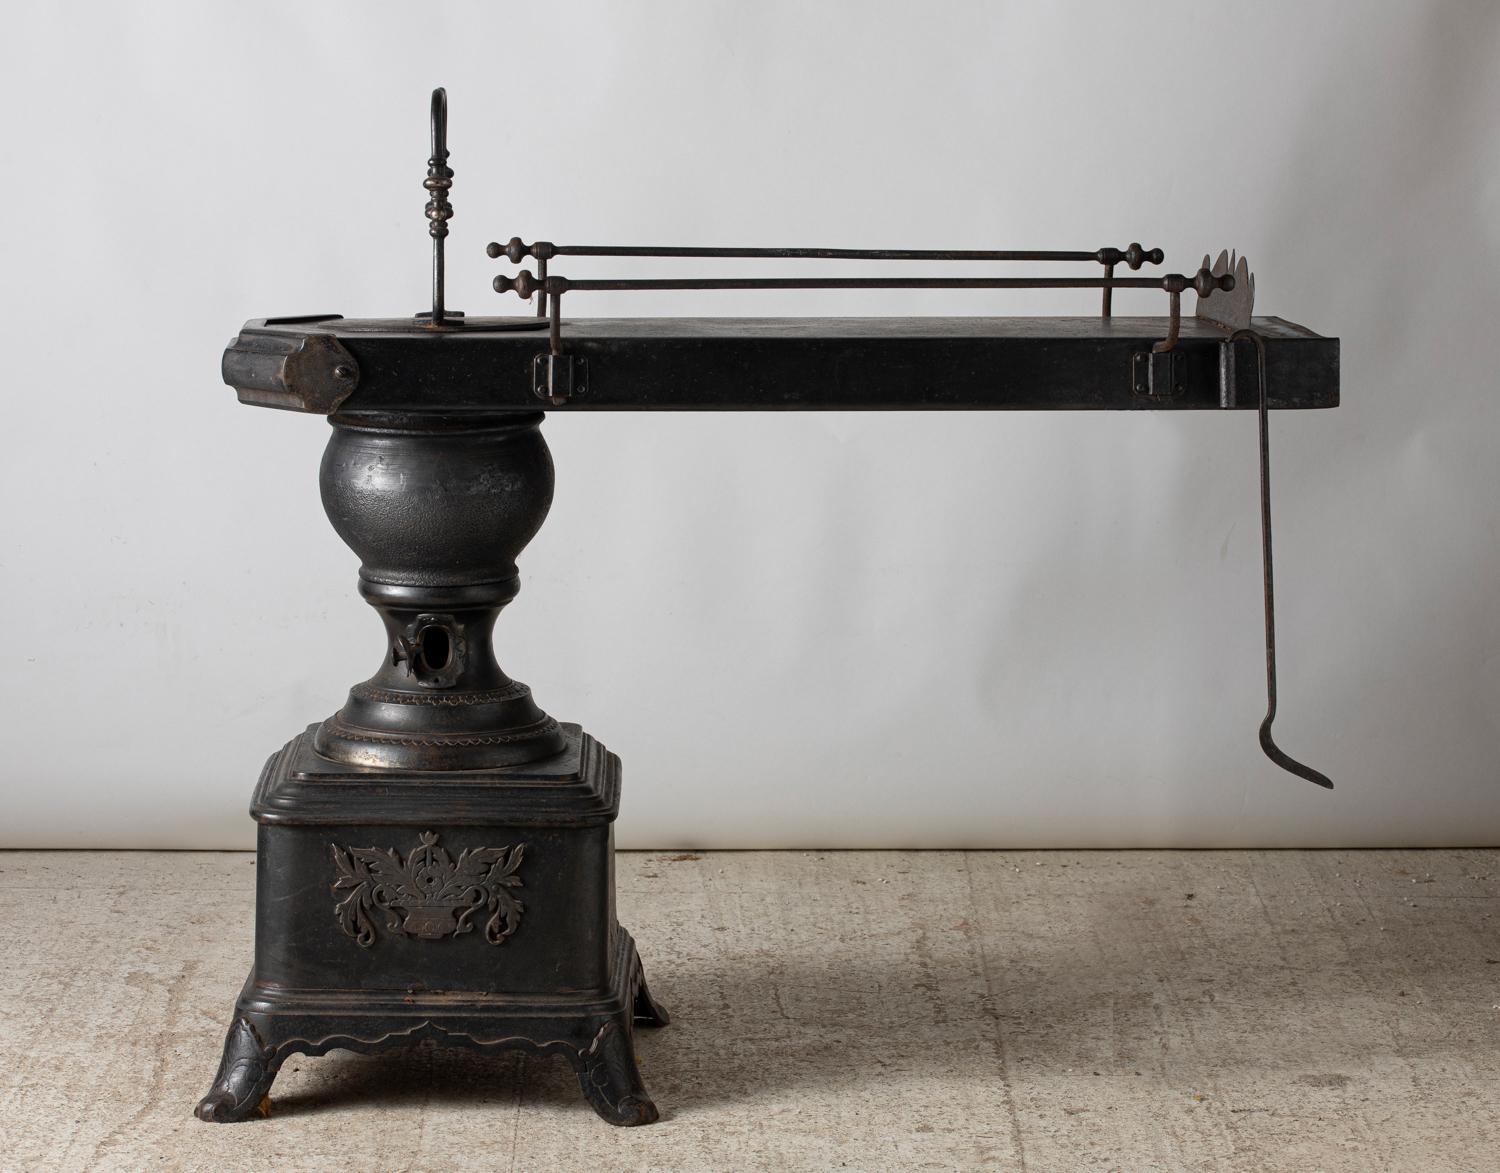 Ironer pan with side body in cast iron and sheet iron.
Chimney flue making a heating table, France, end of the 19th century.

Measures: The base with the fireplace measures 20.1 in wide by 20.1 in deep.
The table measures 48.43 in long by 16.14